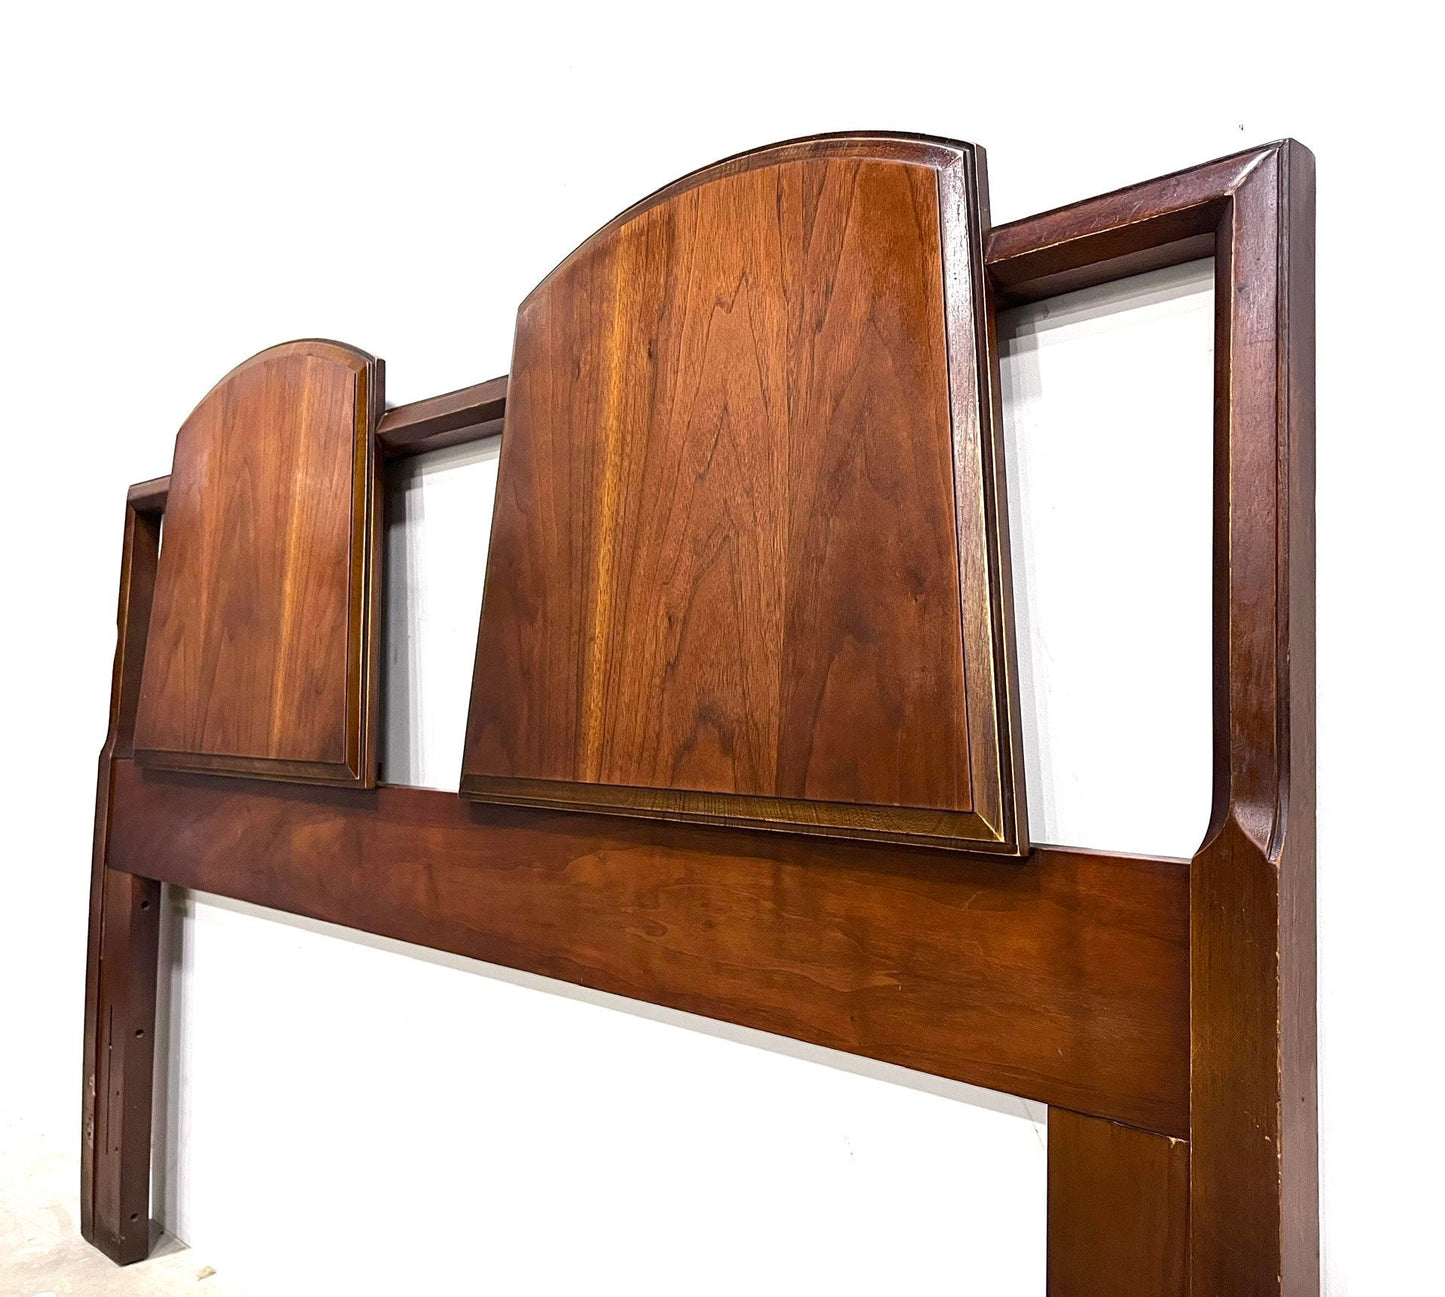 Lane “First Edition” Mid Century Modern Full or Queen Headboard from Scandia Collection c. 1960s